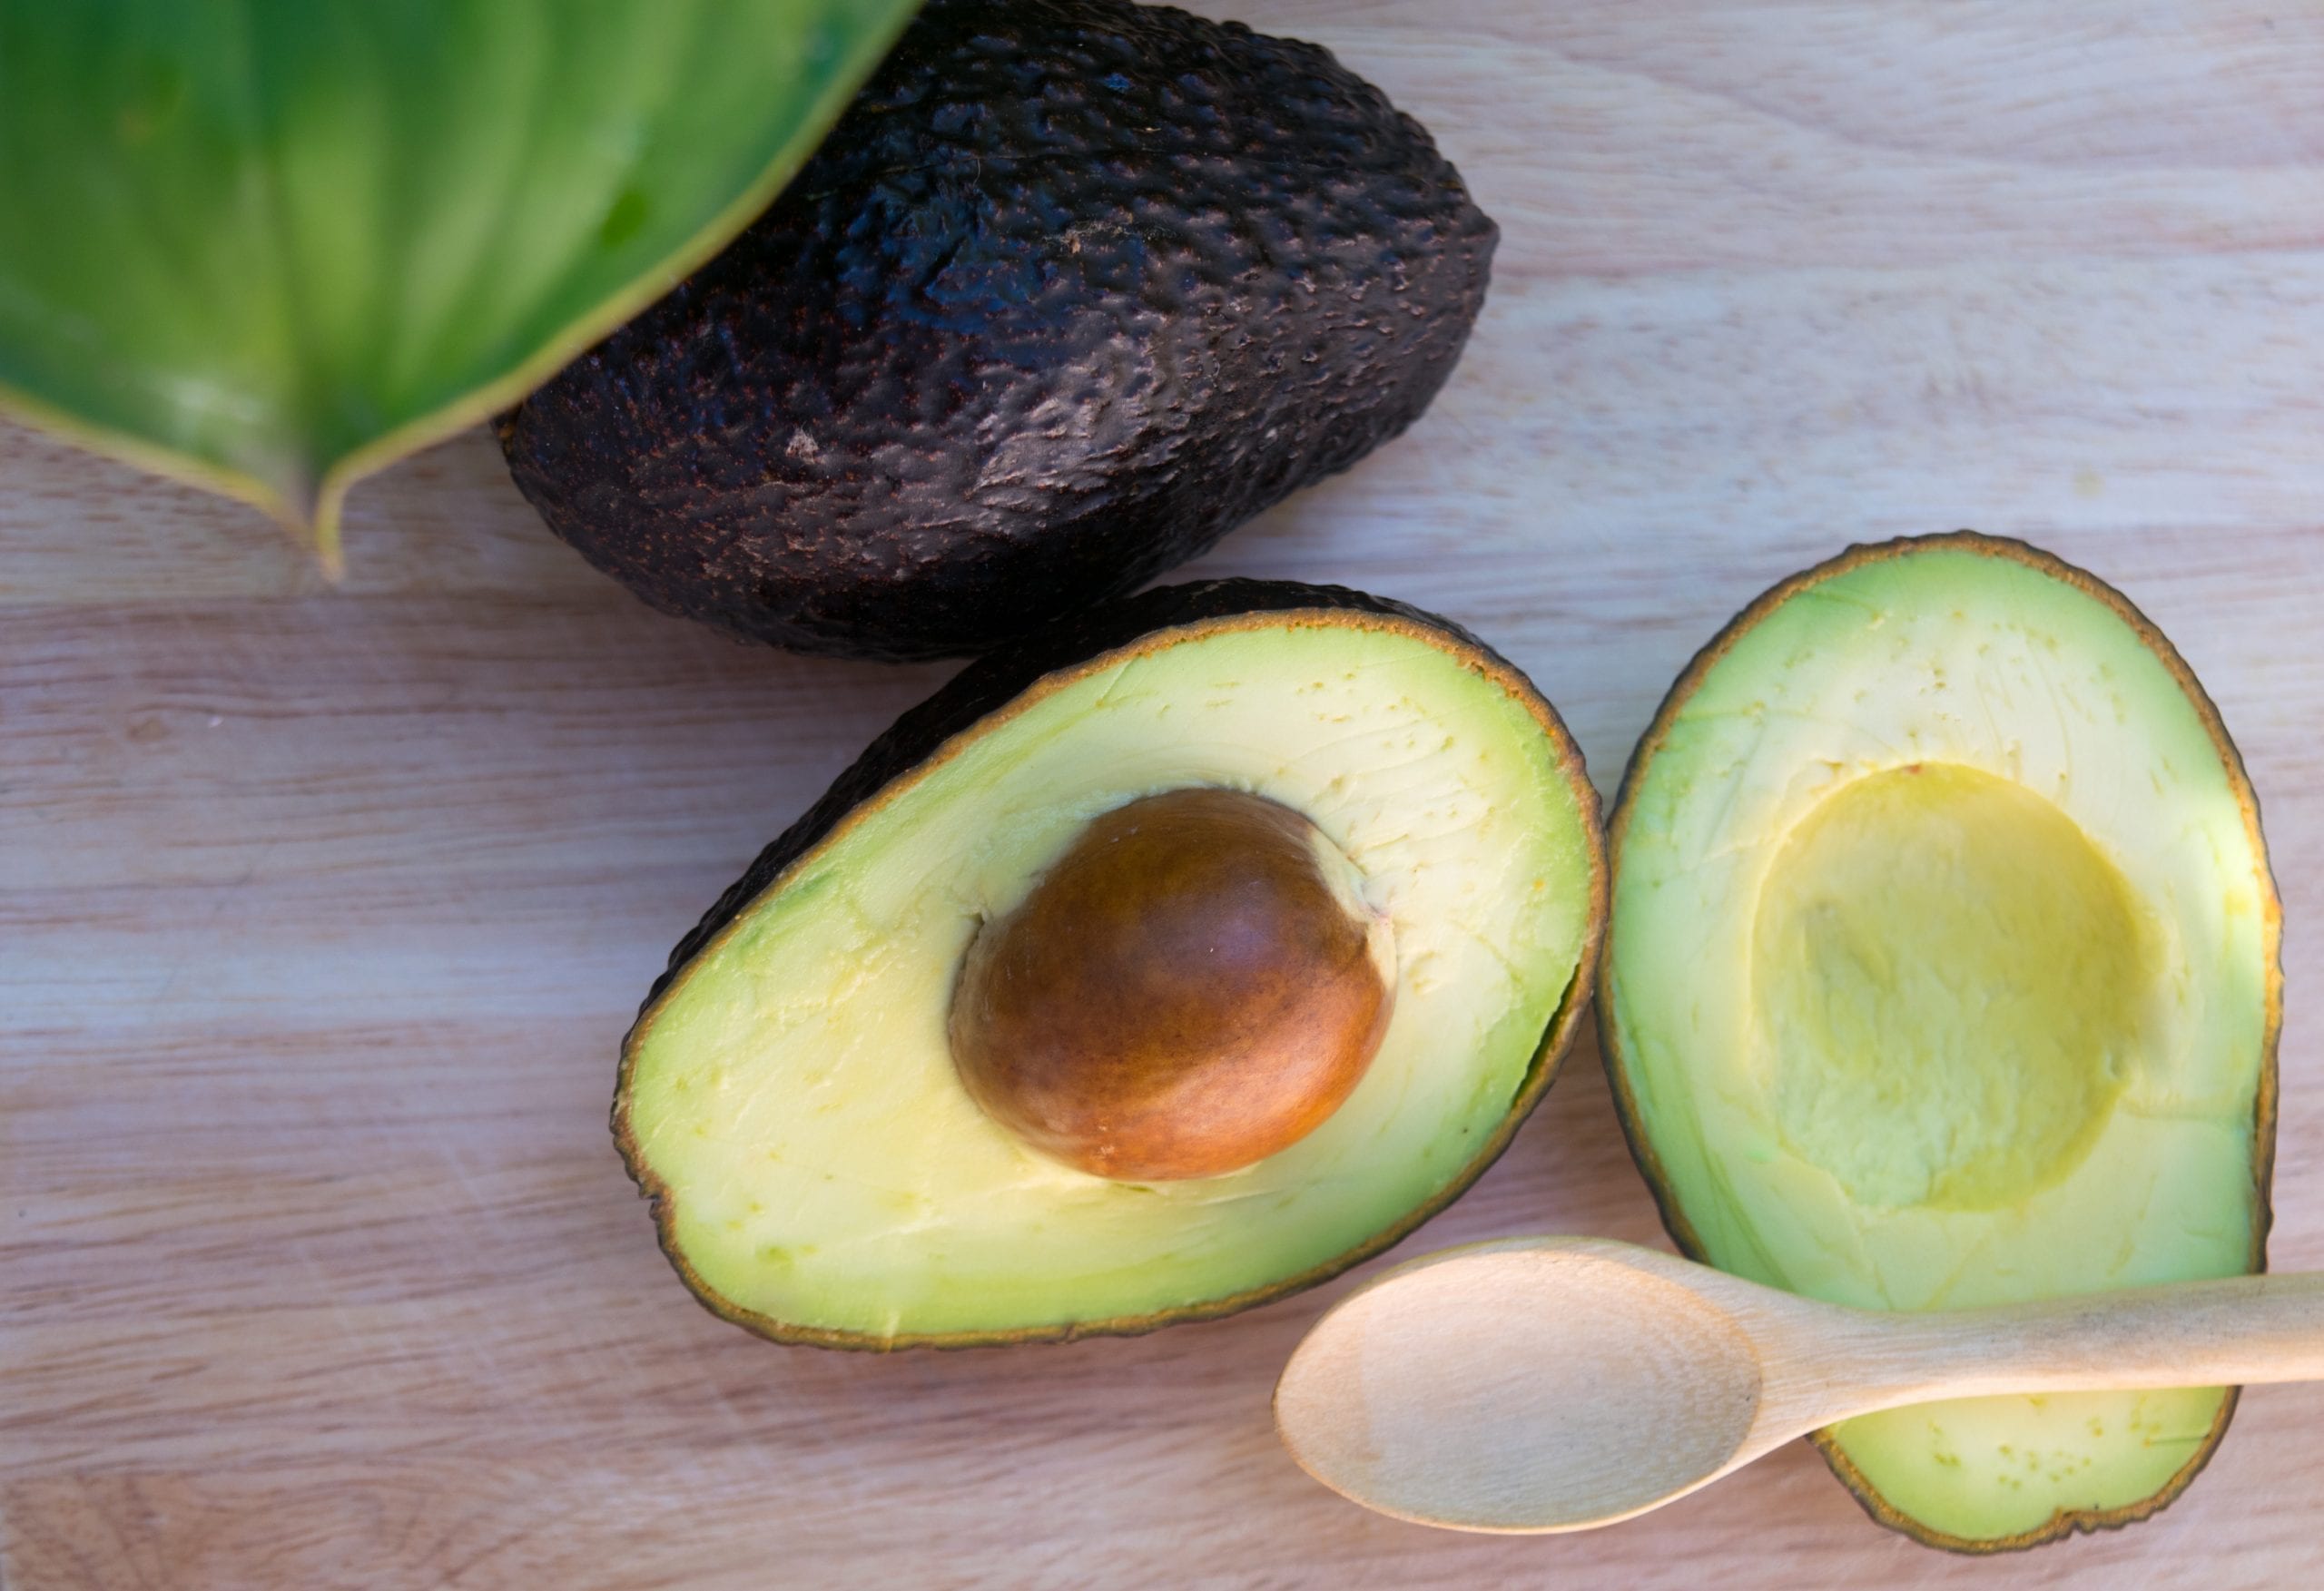 Avocados Sold in California and Five Other States Recalled for Possible Listeria Contamination